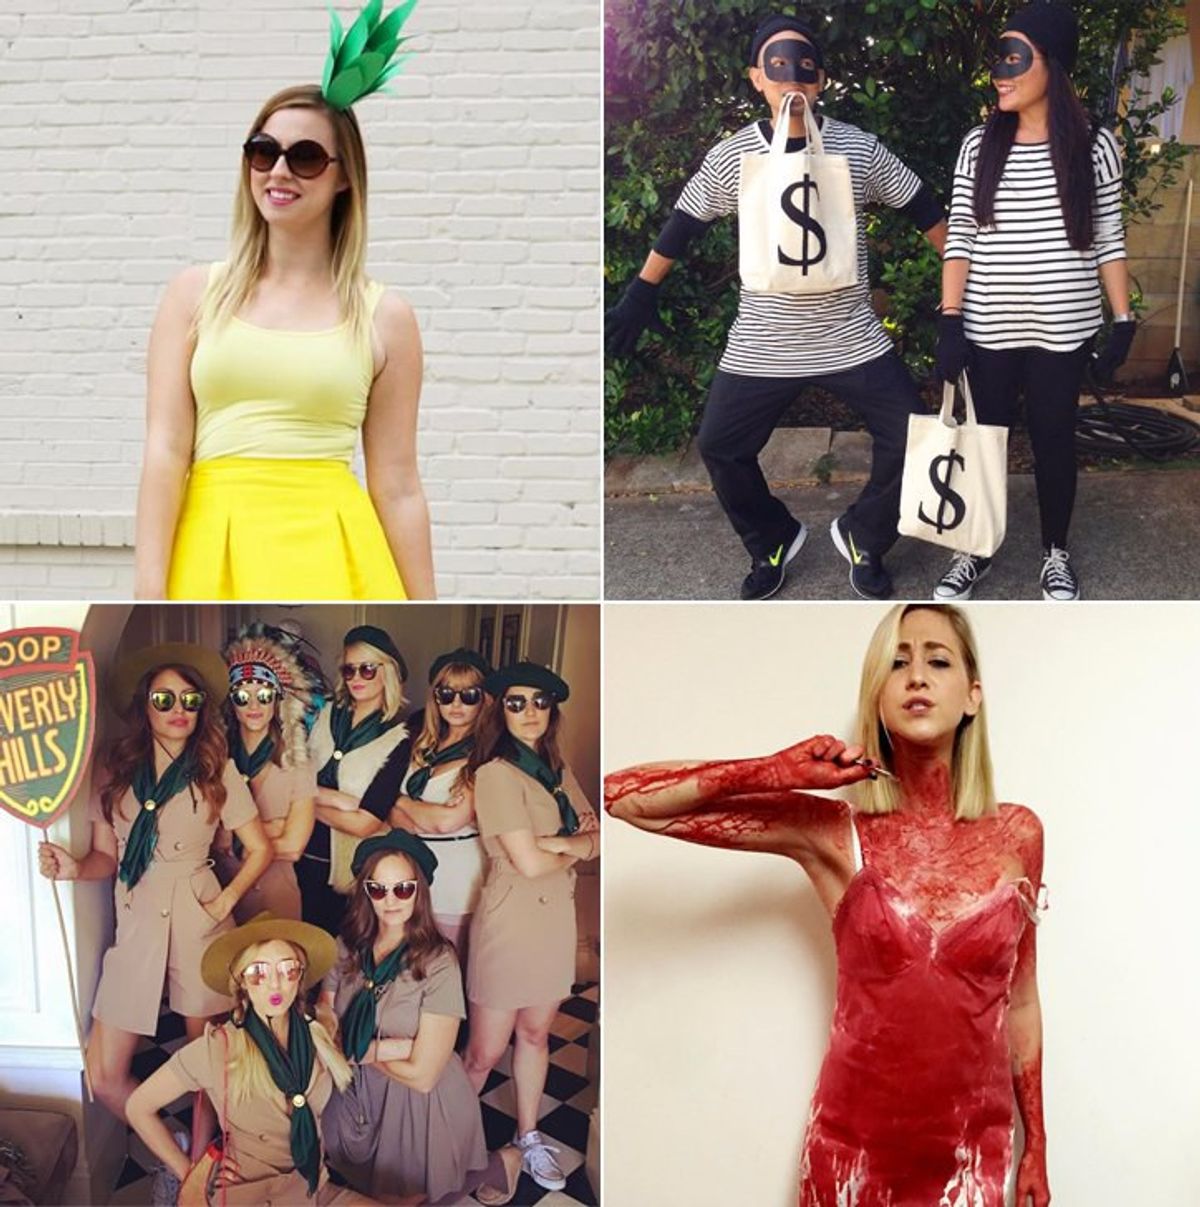 Let's Talk About Halloween Costumes